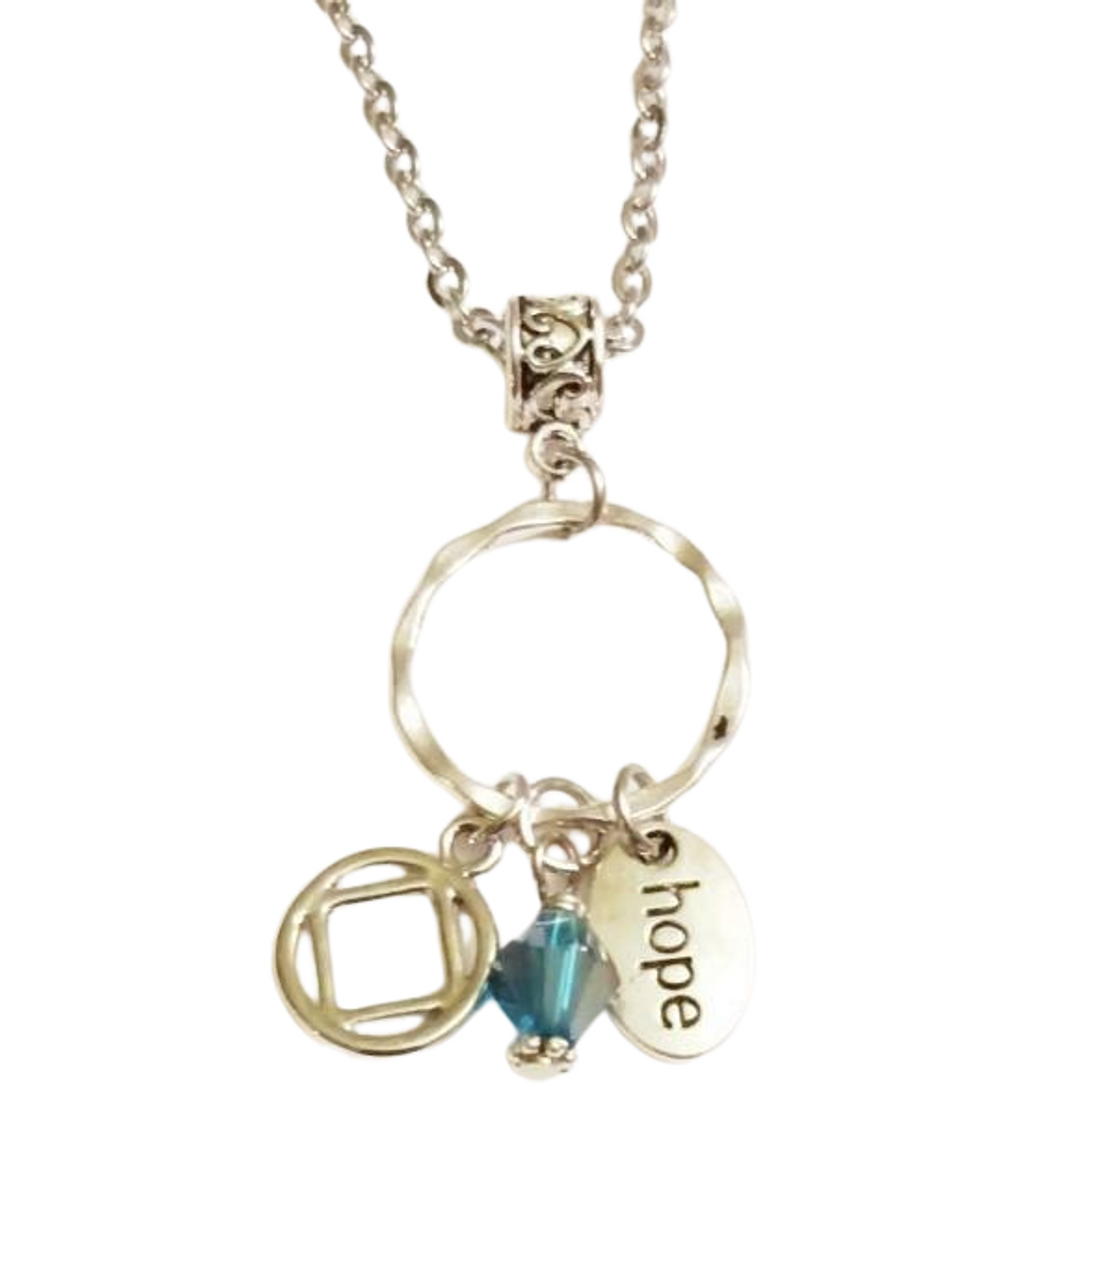 Charm Holder Pendant & Interchangeable Charms – The Styled Collection